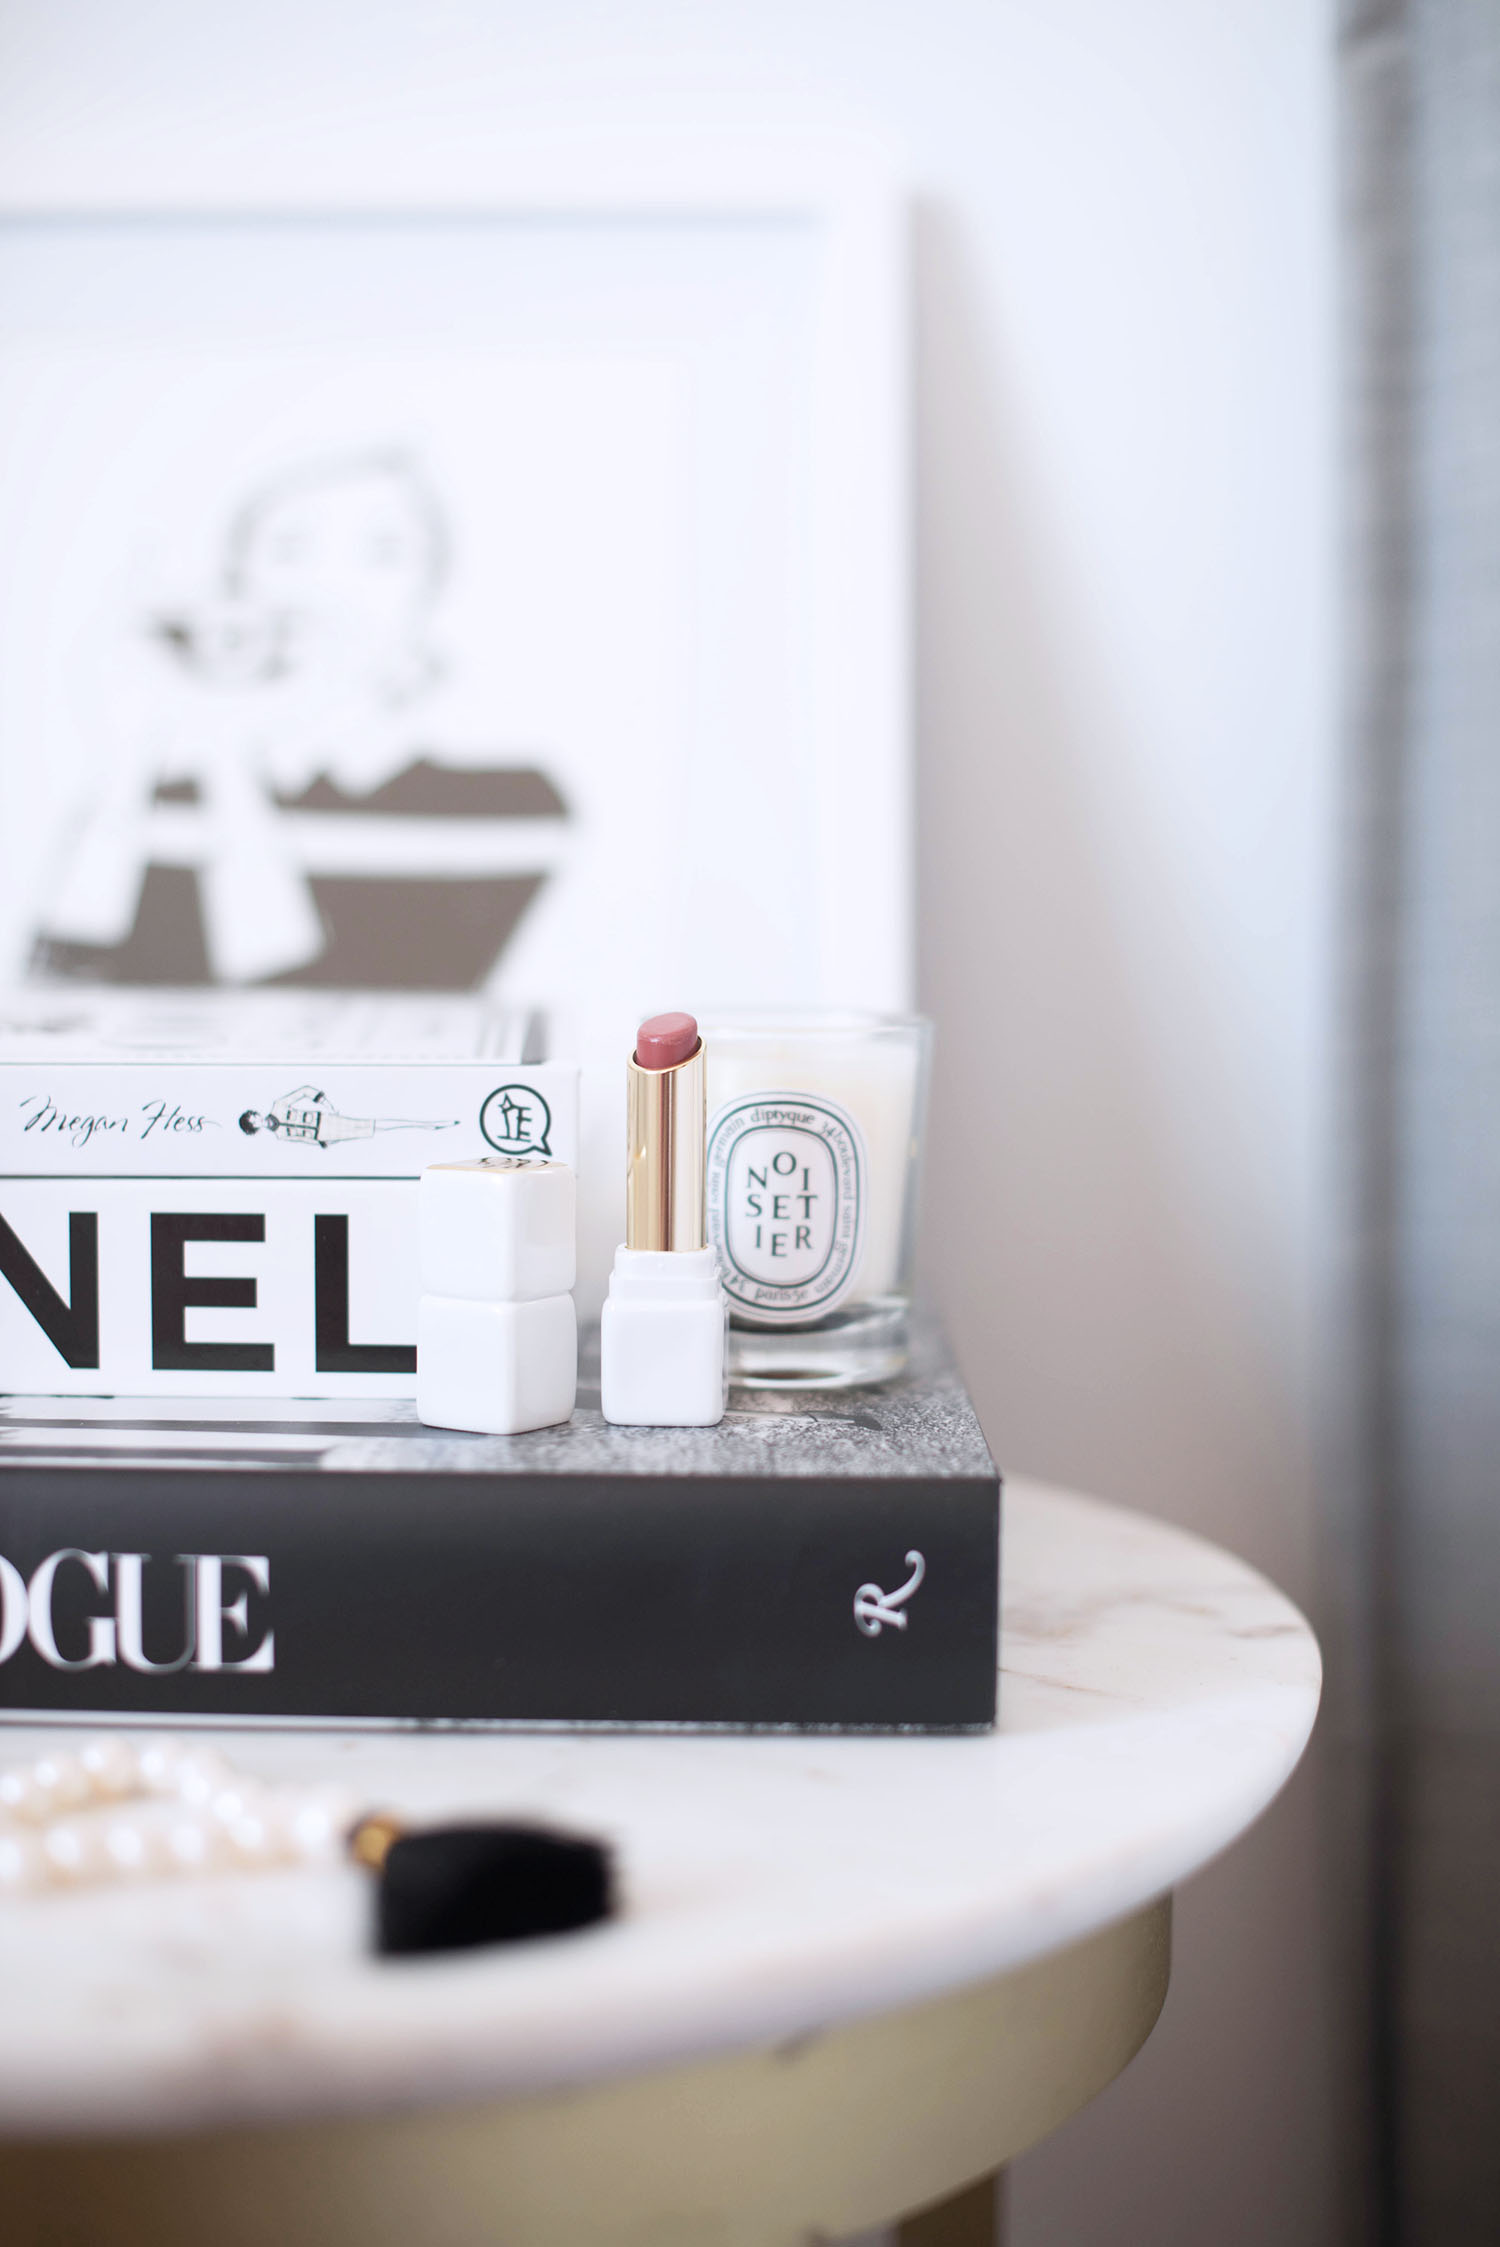 Details on the side table of Winnipeg fashion blogger Cee Fardoe of Coco & Vera, including a Diptyque Noisier candle, Guerlain lipstick and CHANEL book